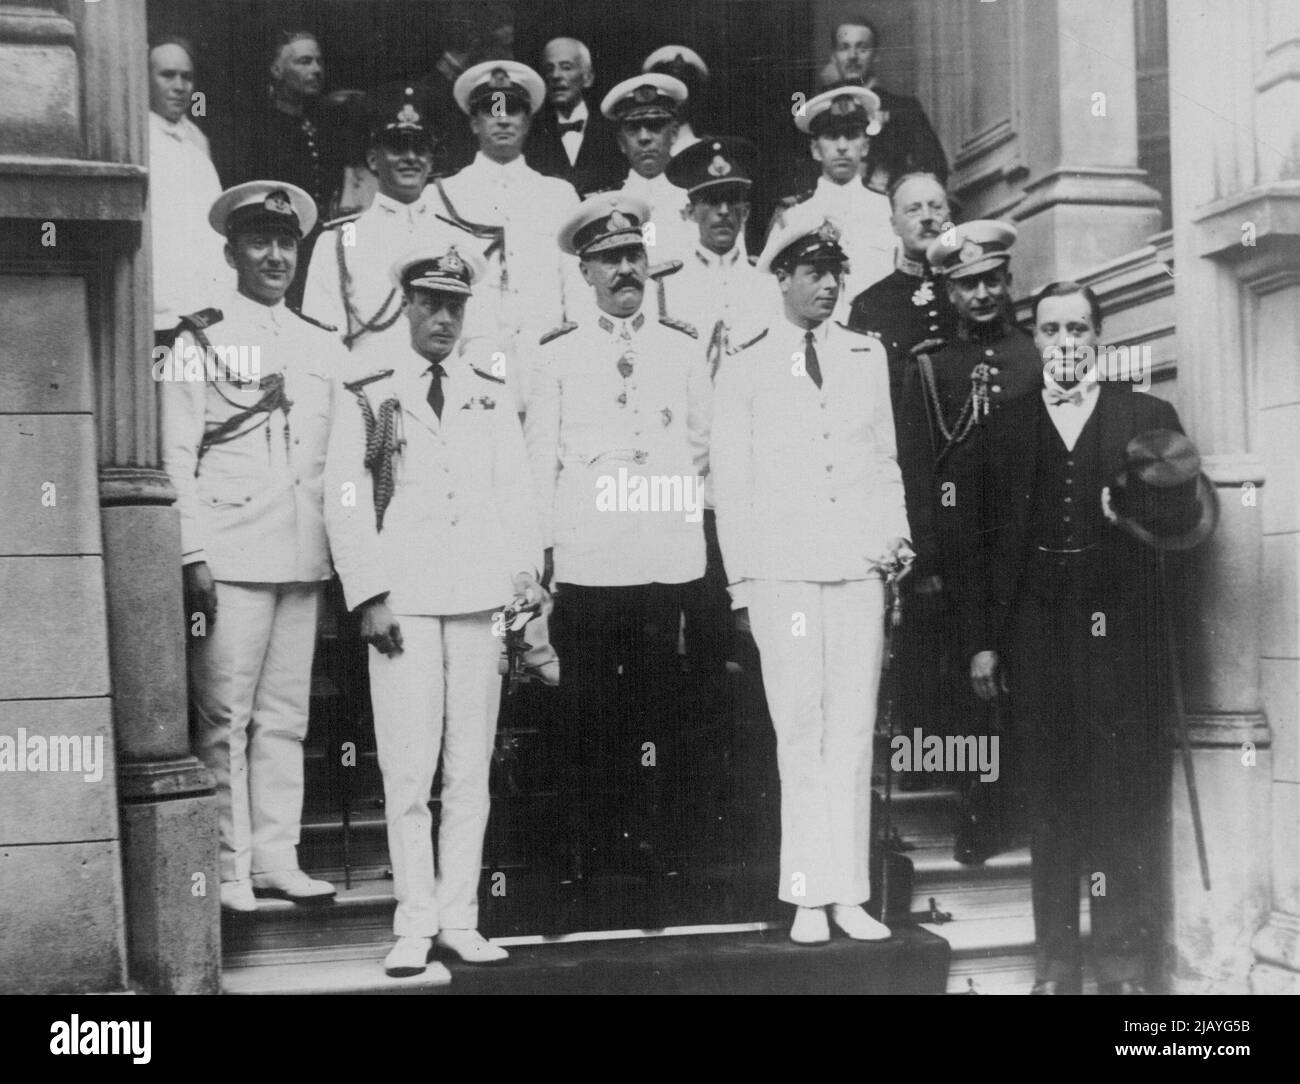 Prince of Wales's Tour in South America: The Prince of Wales and Prince George between whom is President Uriburu on the steps of the British Embassy in Buenos Aires. The British Ambassador, Sir Ronald Macleay, is seen bareheaded behind Prince George's shoulder. May 14, 1932. Stock Photo